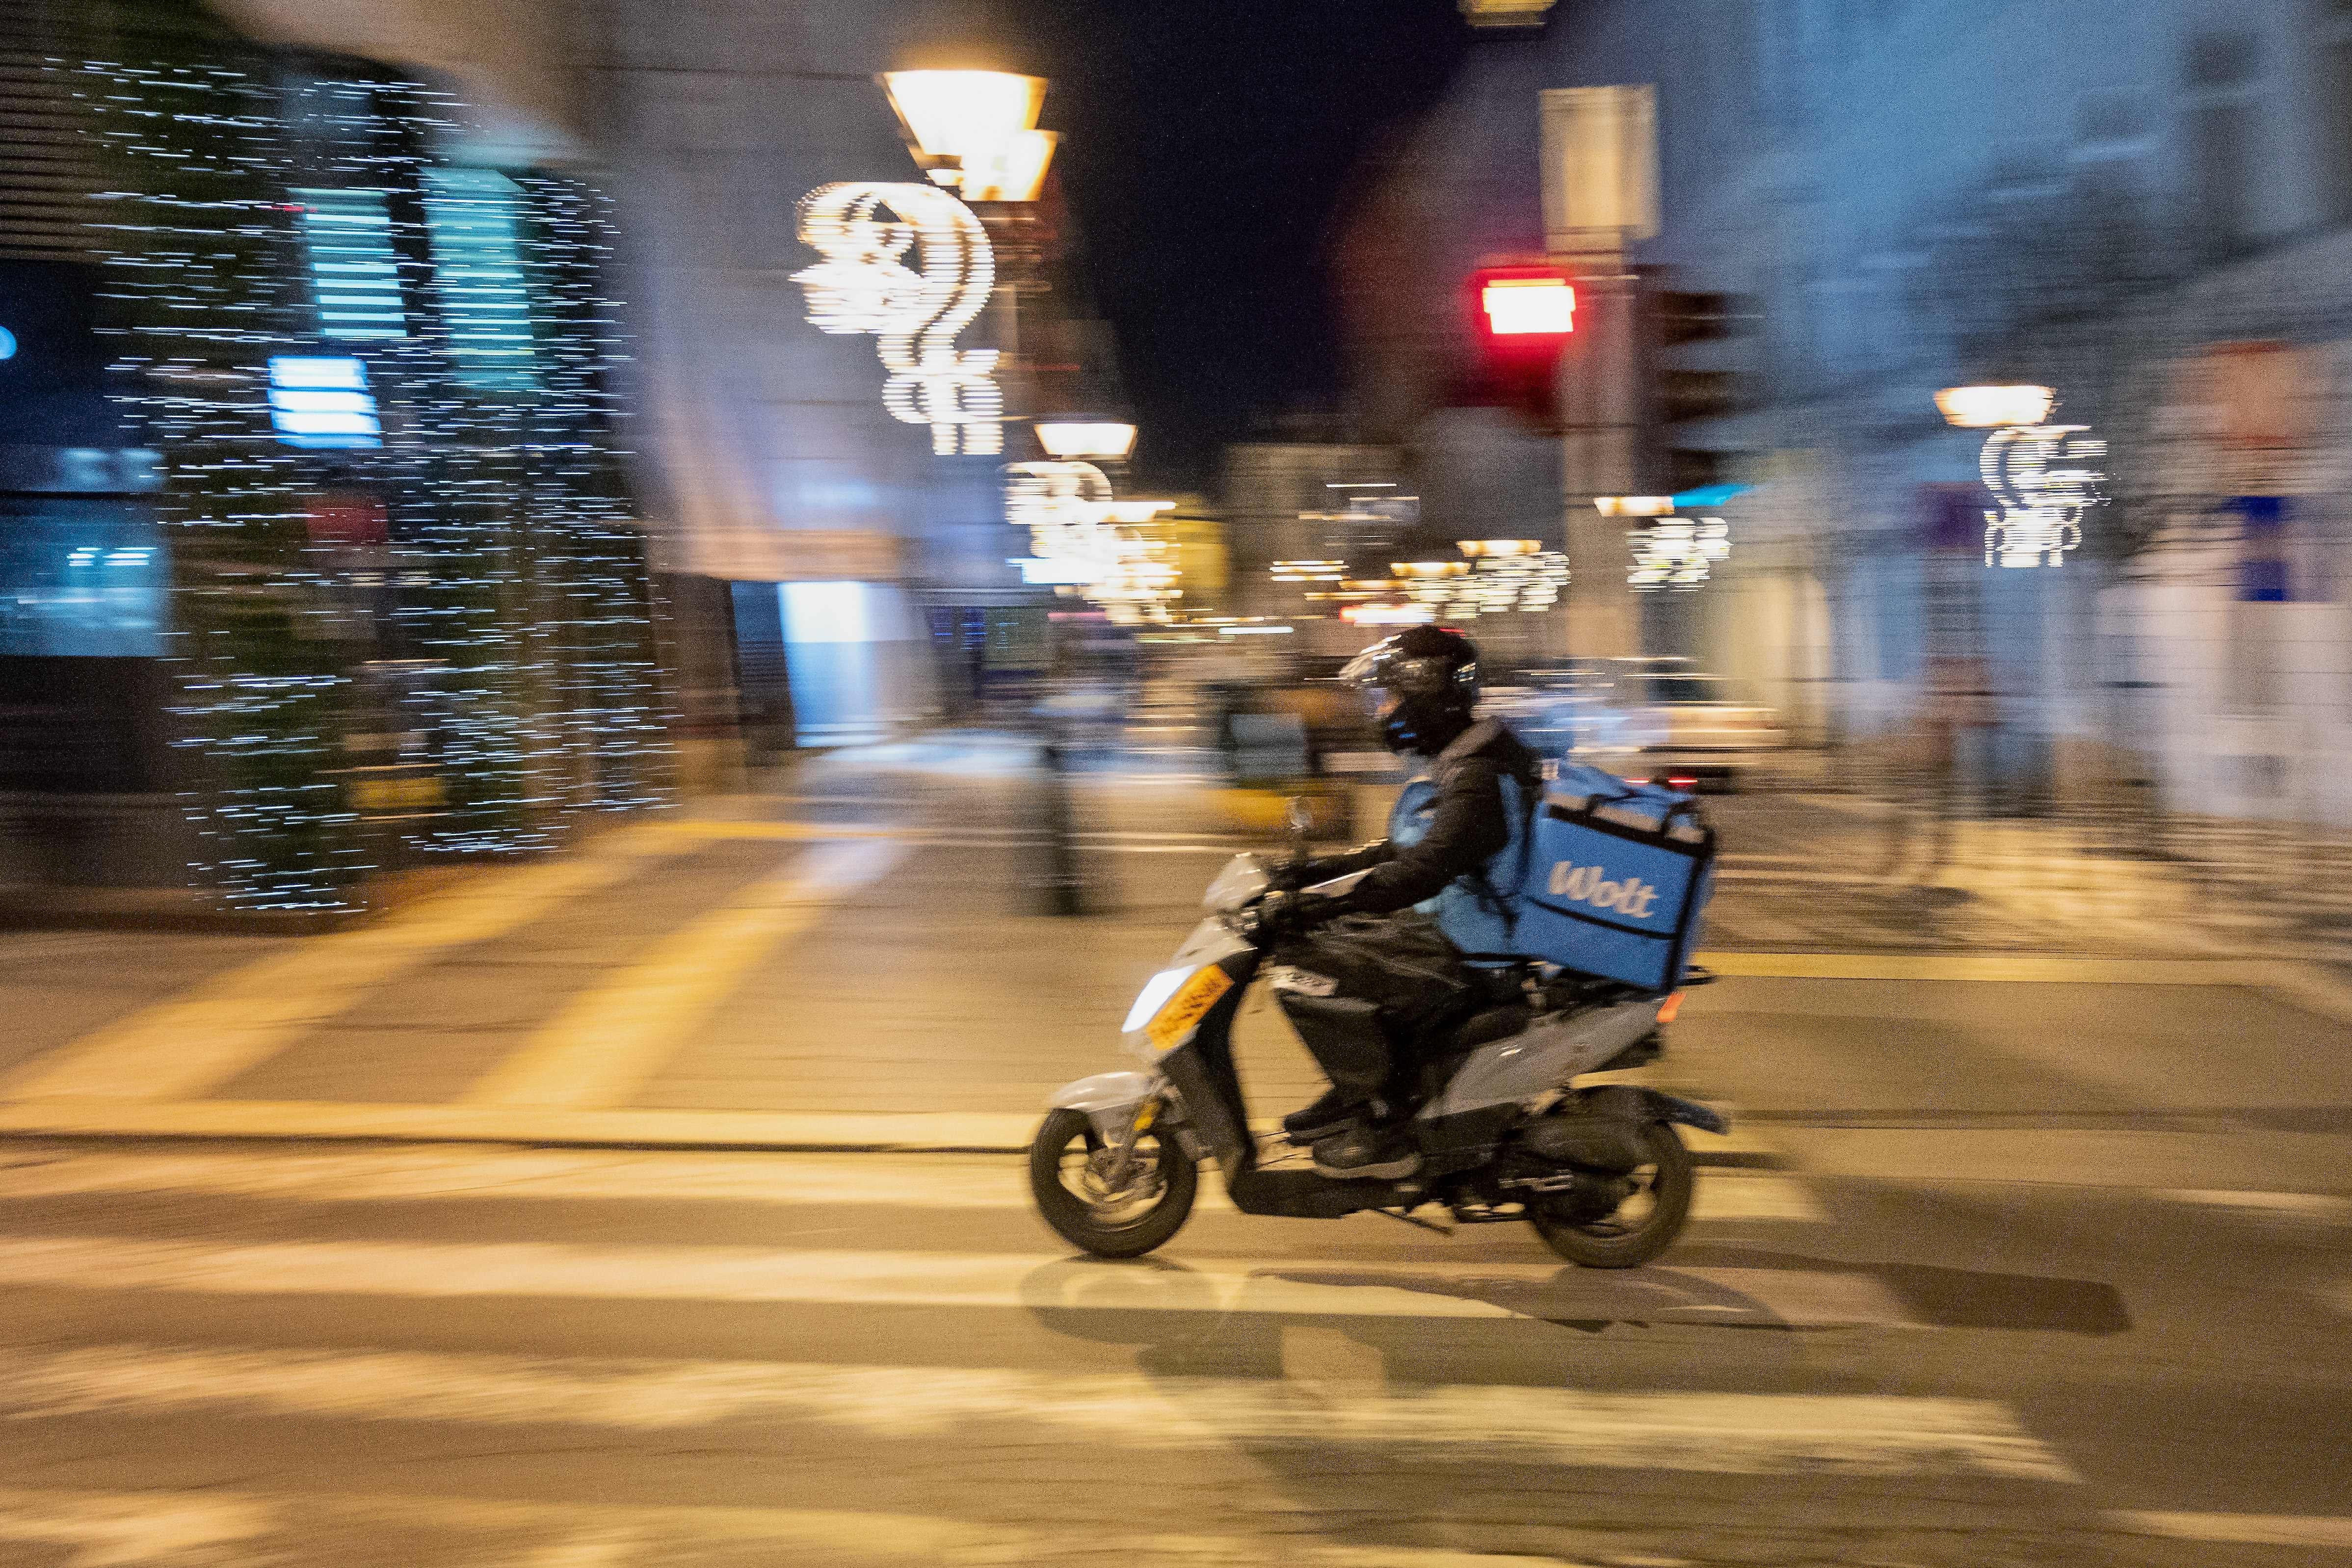 A food delivery bike courier blurred in motion through an empty street